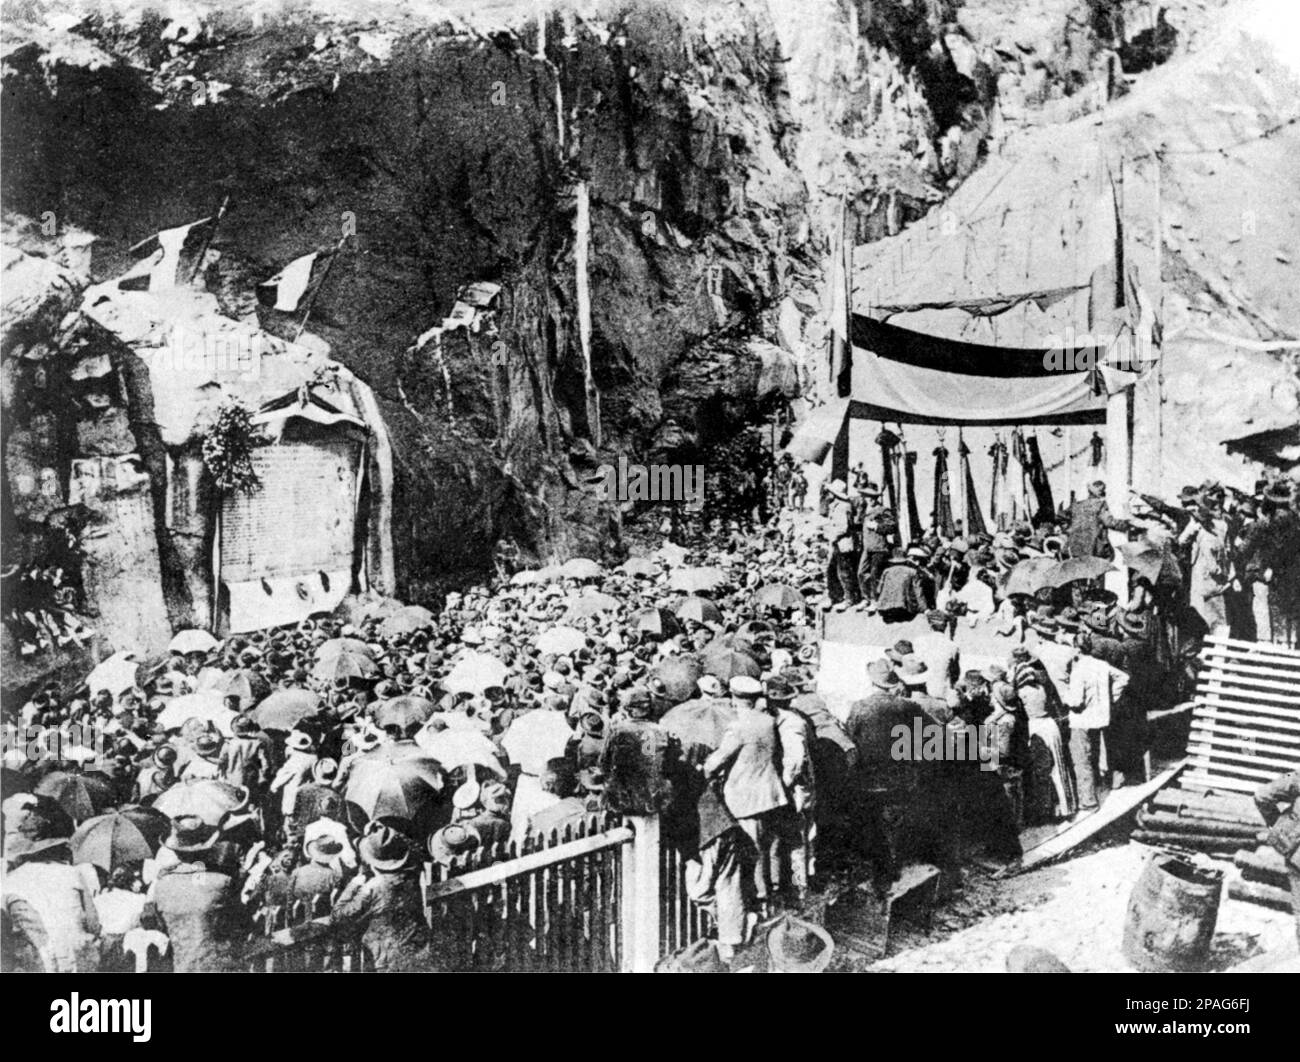 1905, TRAFORO DEL SEMPIONE ,  ITALY : The commemoration of 28 may 1905 for 58 workers dead during the works for the tunnel  Iselle to Briga ( Brig ) , at last opened the day 19 may 1906. The Simplon Tunnel is an Alpine railroad tunnel that connects the Swiss town of Brig with Domodossola in Italy, though its relatively straight trajectory does not run under Simplon Pass itself. It actually consists of two single-track tunnels built nearly 20 years apart. For more than half a century it was considered to be the longest tunnel in the world. Simplon tunnel was finally completed in 1906. The Itali Stock Photo